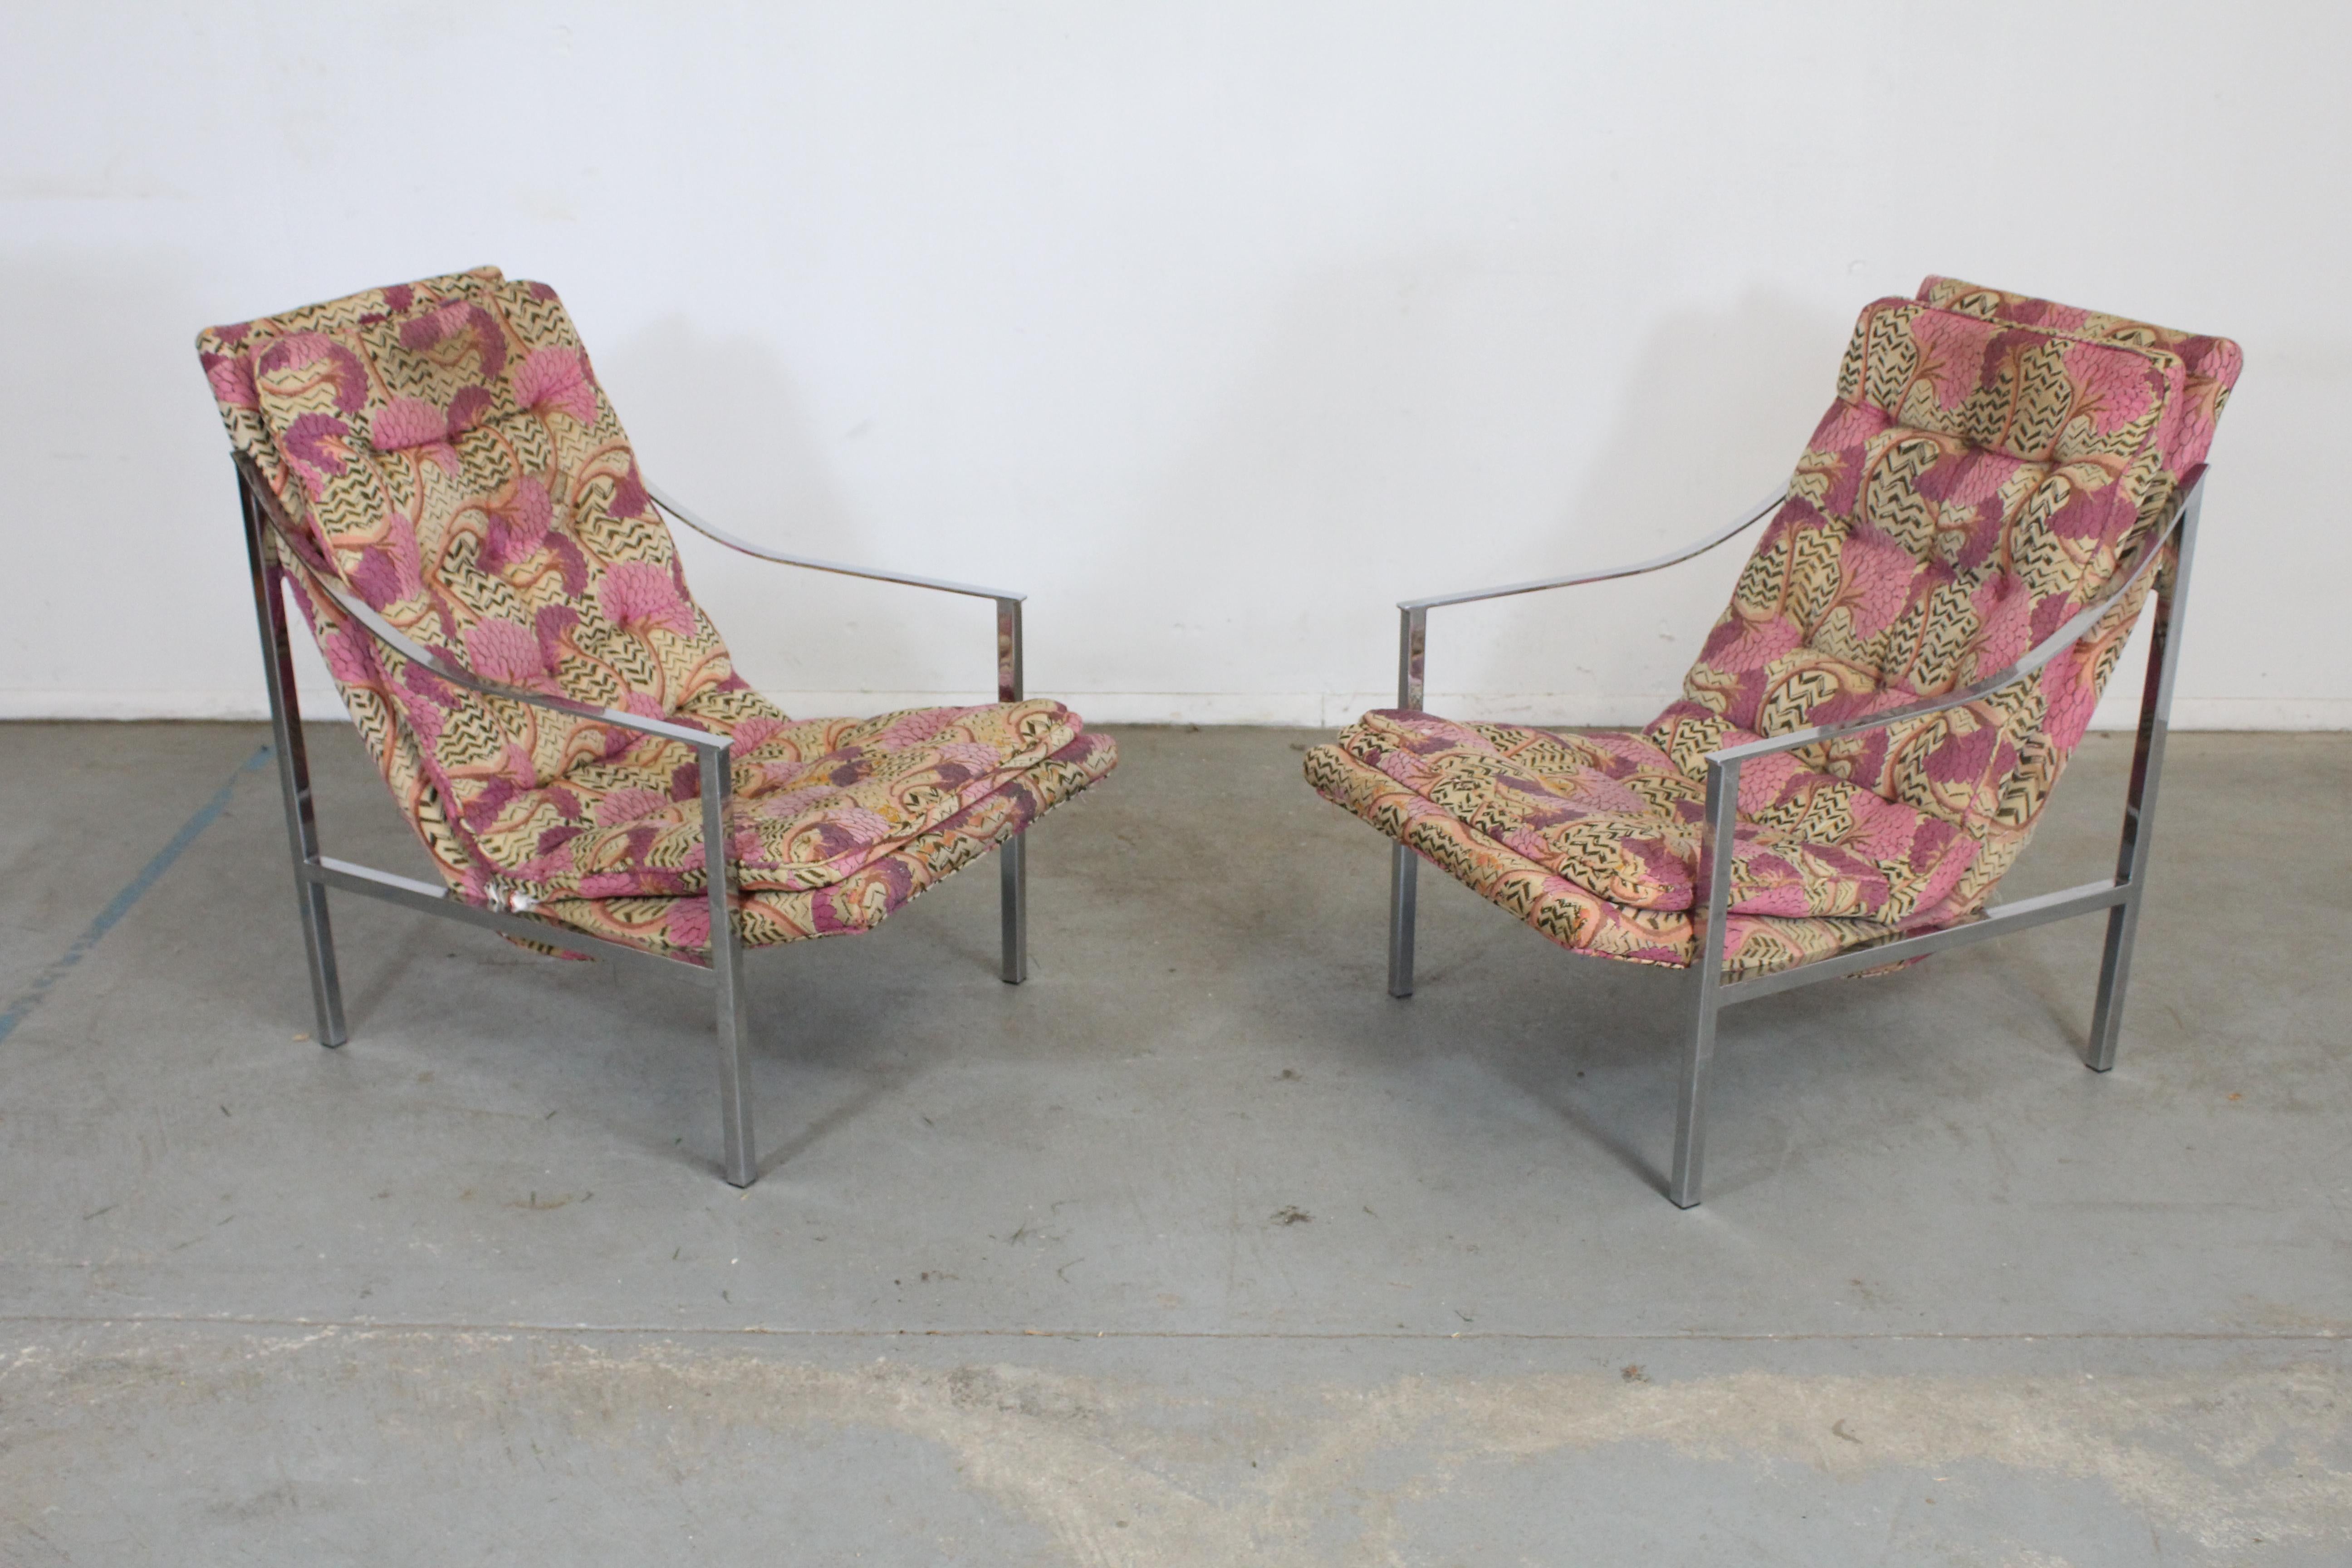 Pair of Mid-Century Modern Milo Baughman style chrome scoop seat lounge chairs.

Offered is a pair of Mid-Century Modern lounge chairs similar to the style of Milo Baughman. These chairs can stand to be reupholstered but they are overall